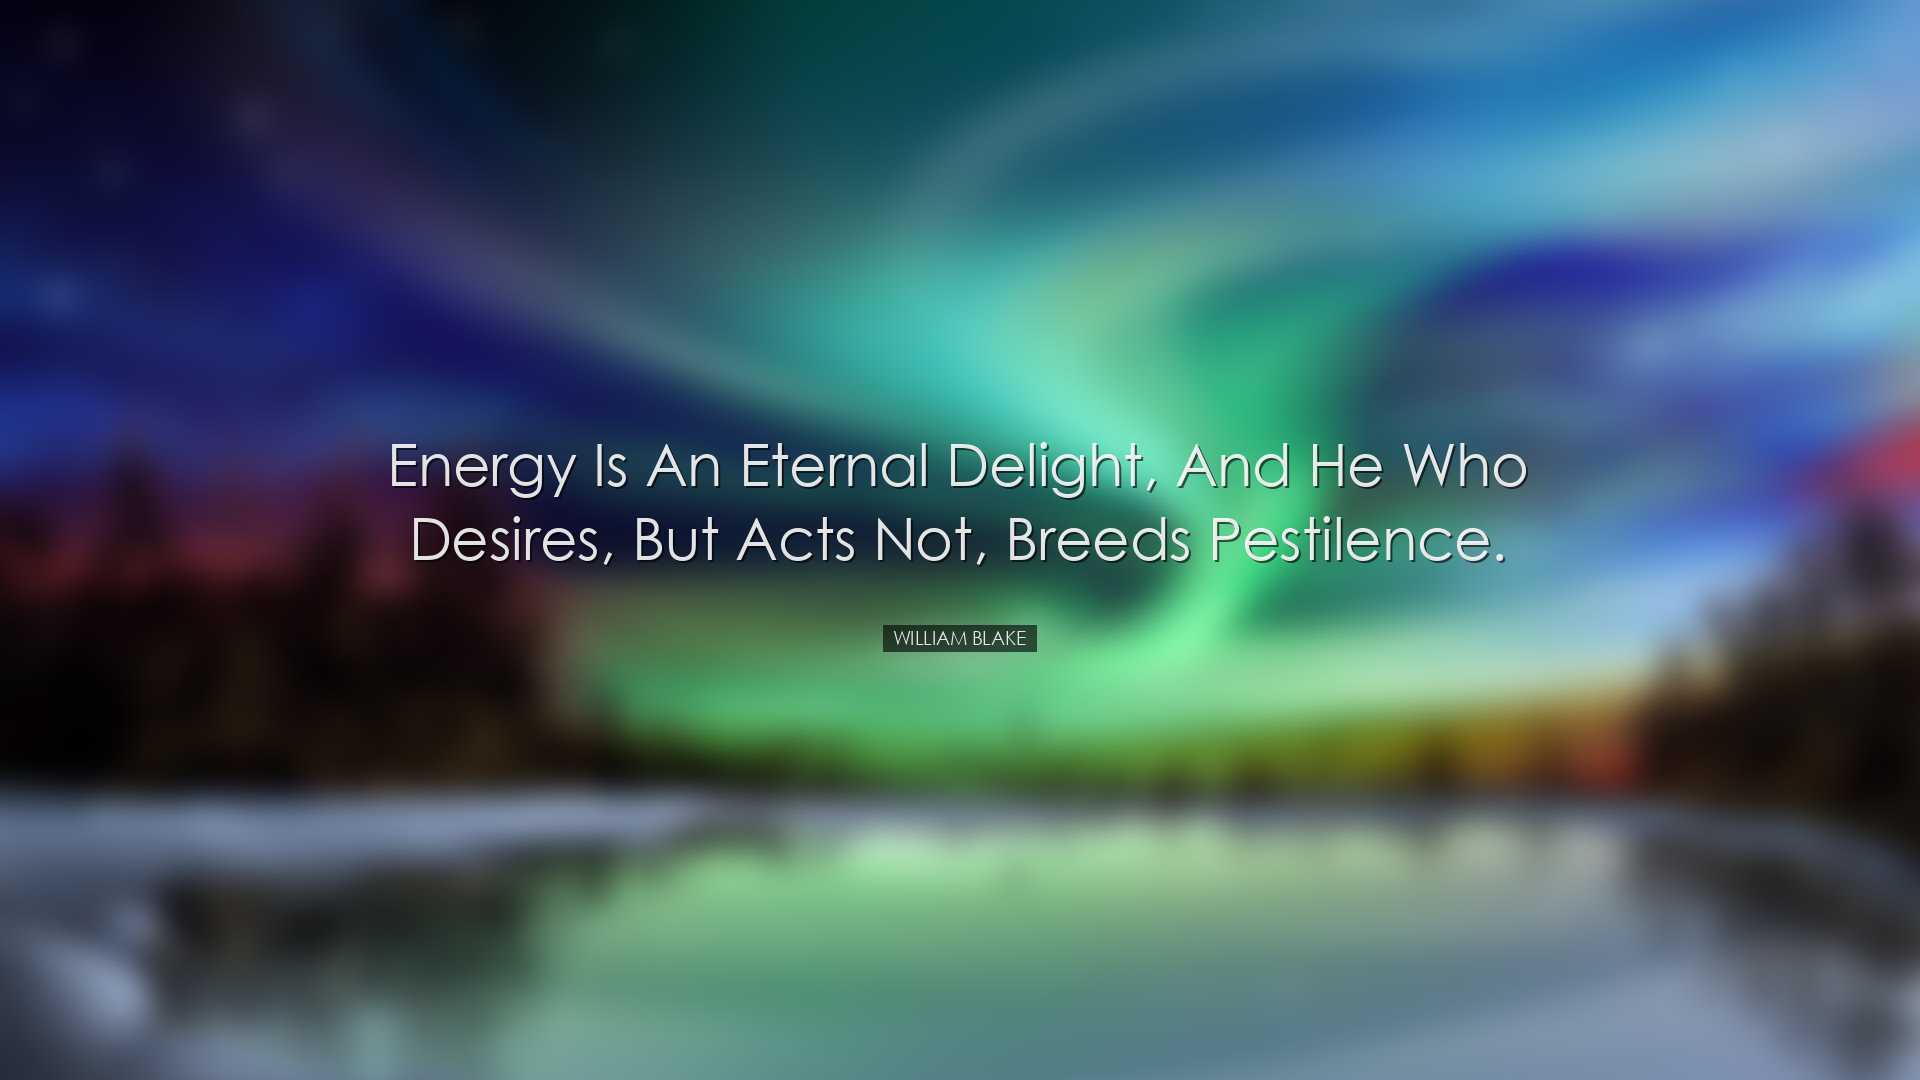 Energy is an eternal delight, and he who desires, but acts not, br